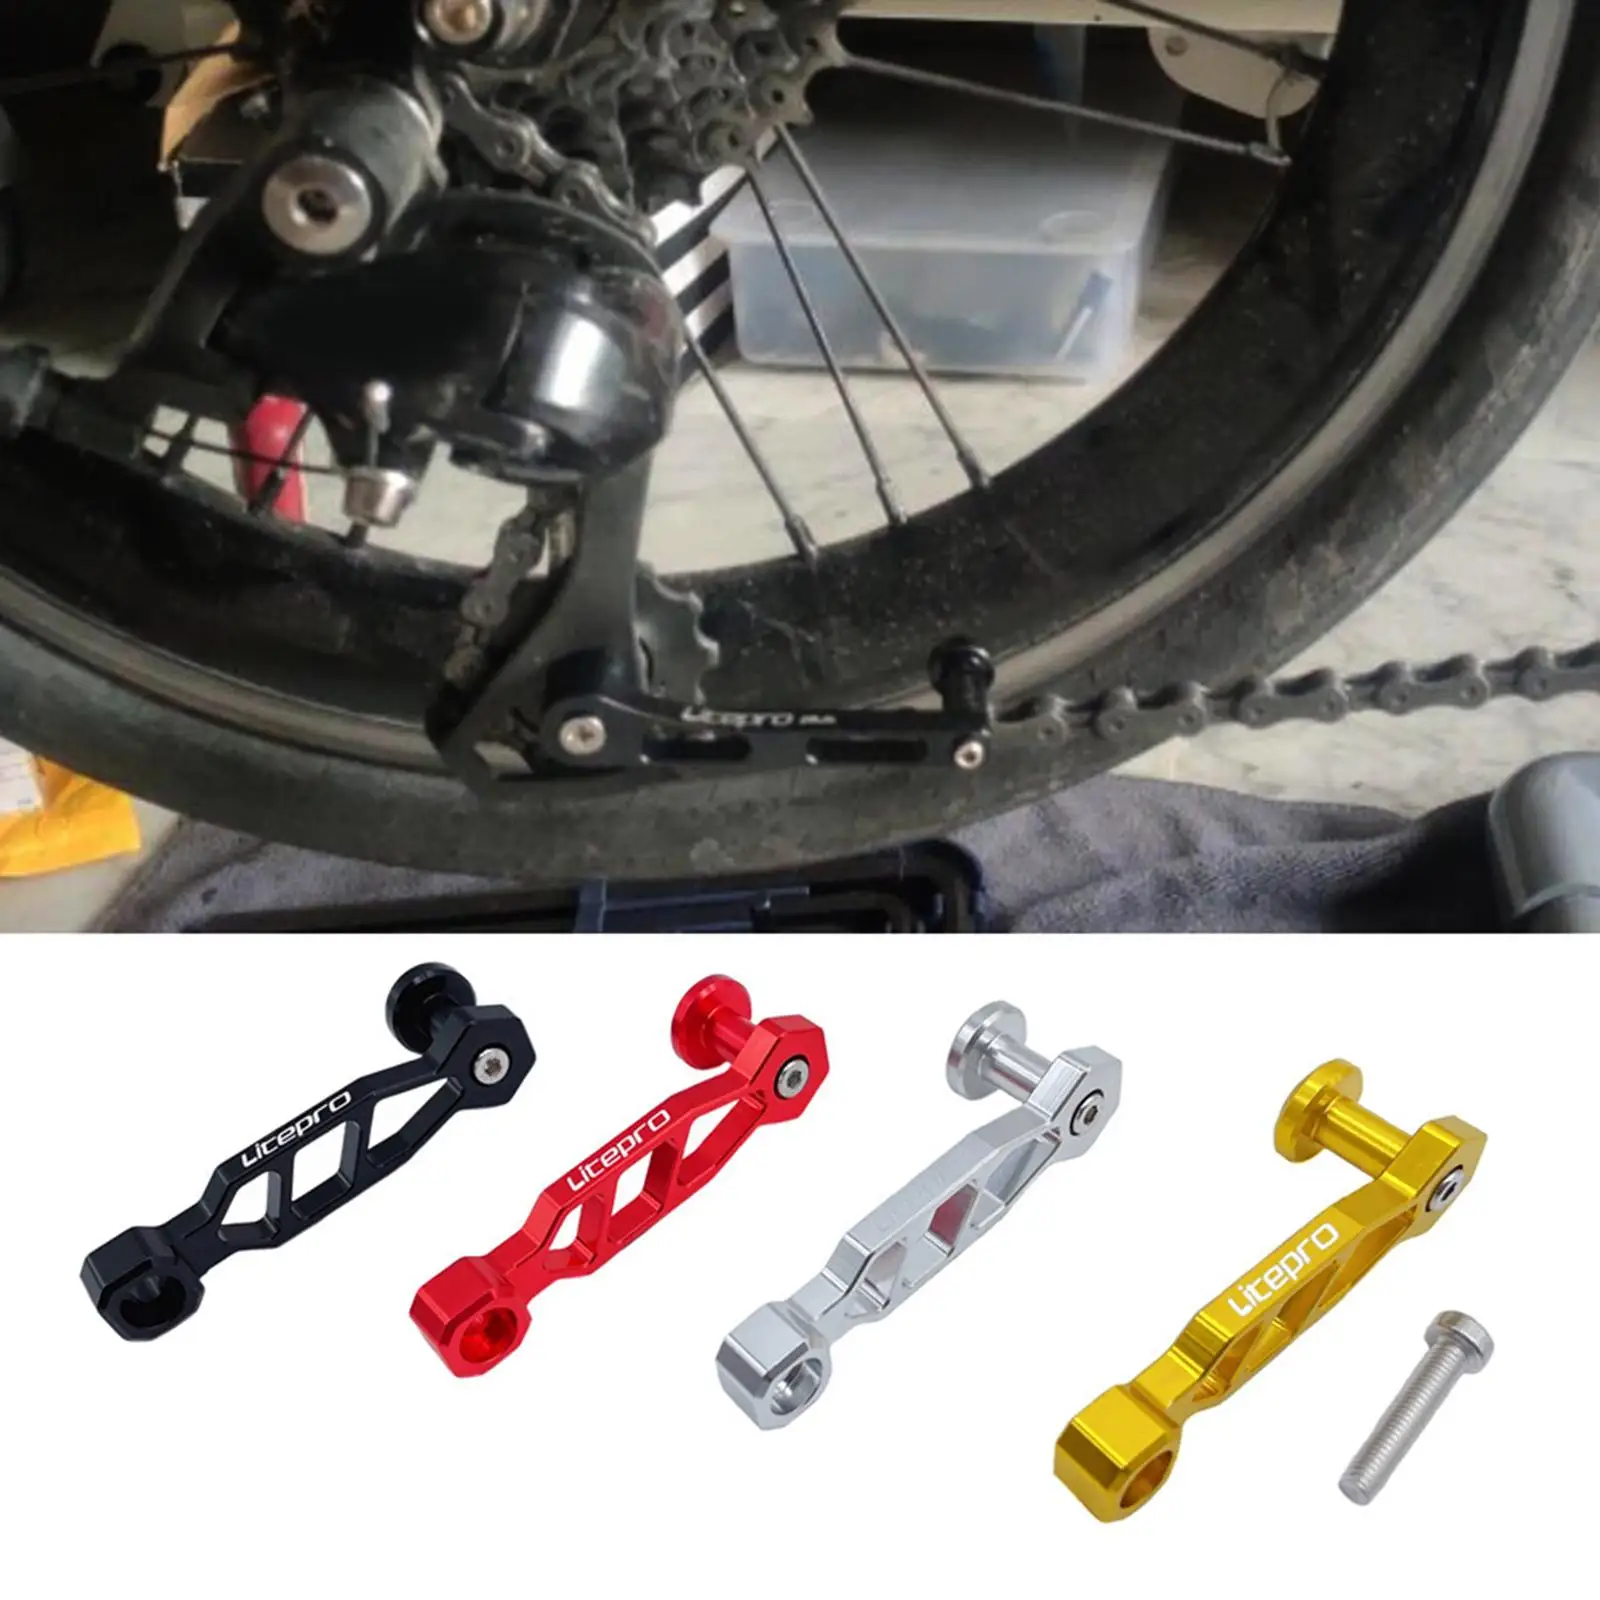 Folding Bike Chain Tensioner, Rear Derailleur Guide, Bicycle Stabilizer Adapter